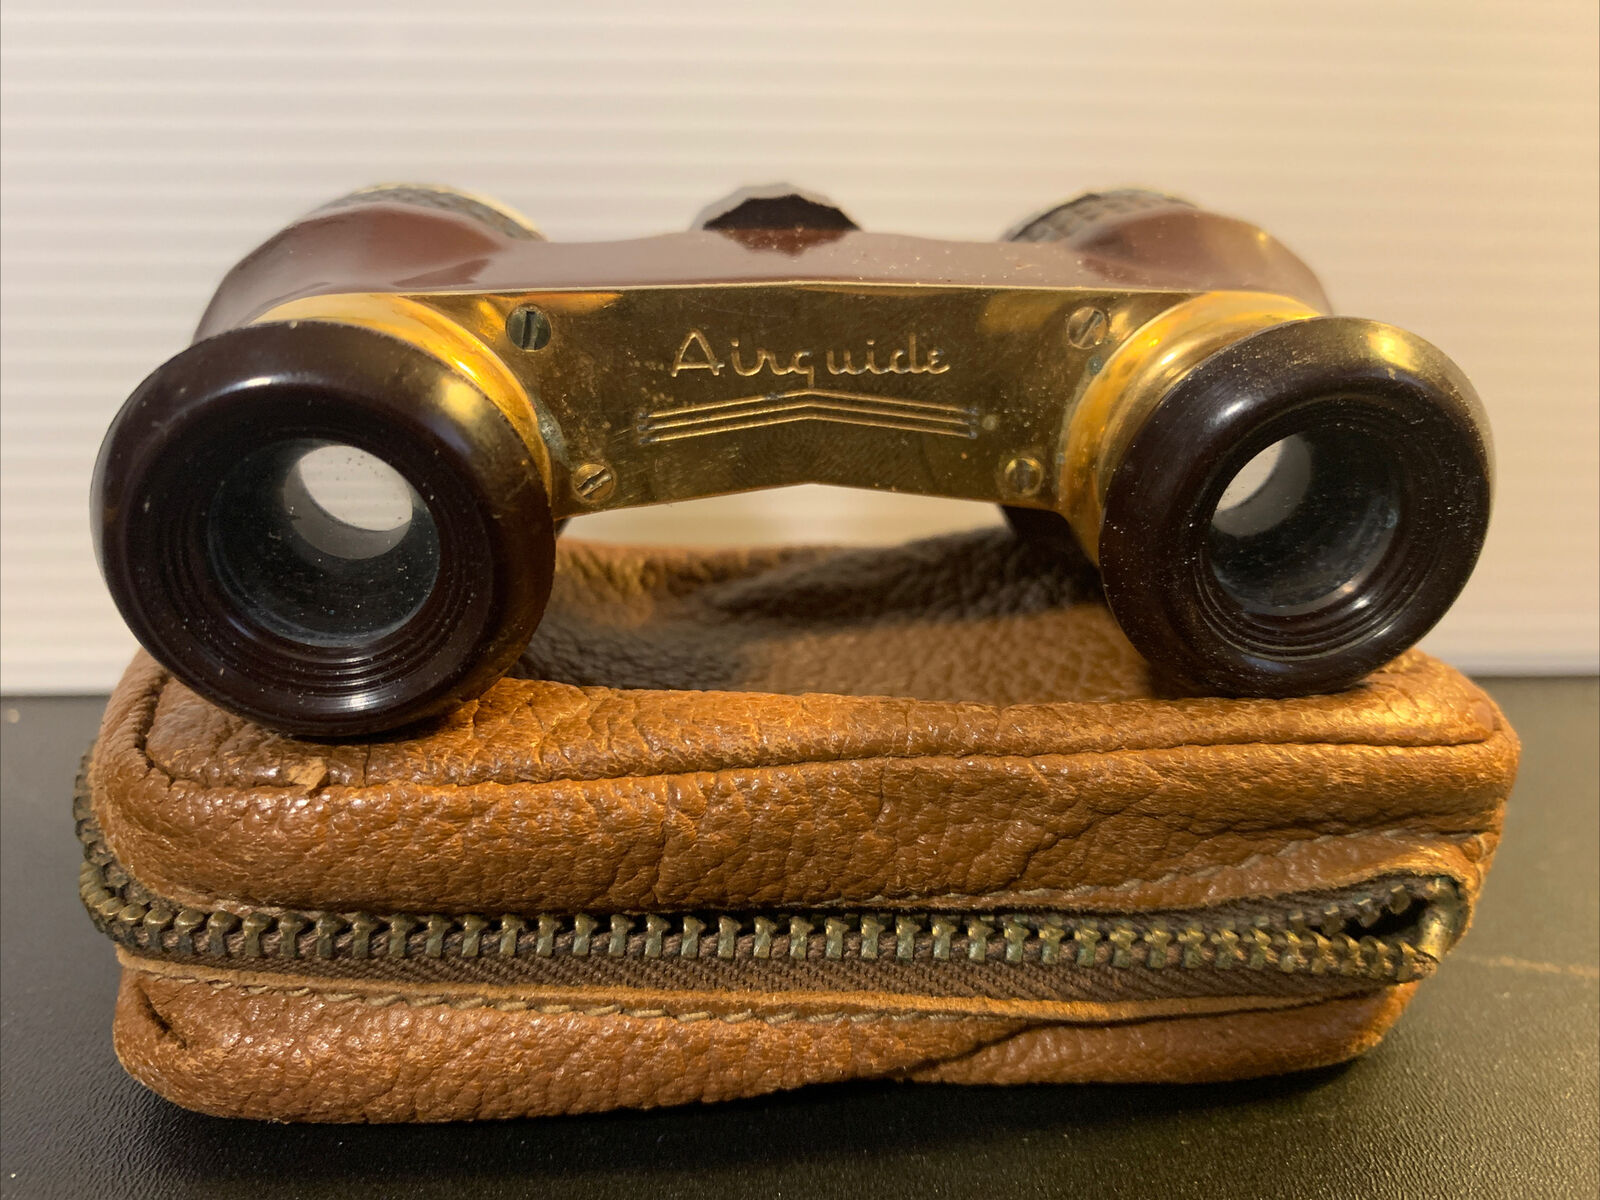 Vintage 1930s Fee And Stemwedel Airguide Opera Glasses With Case